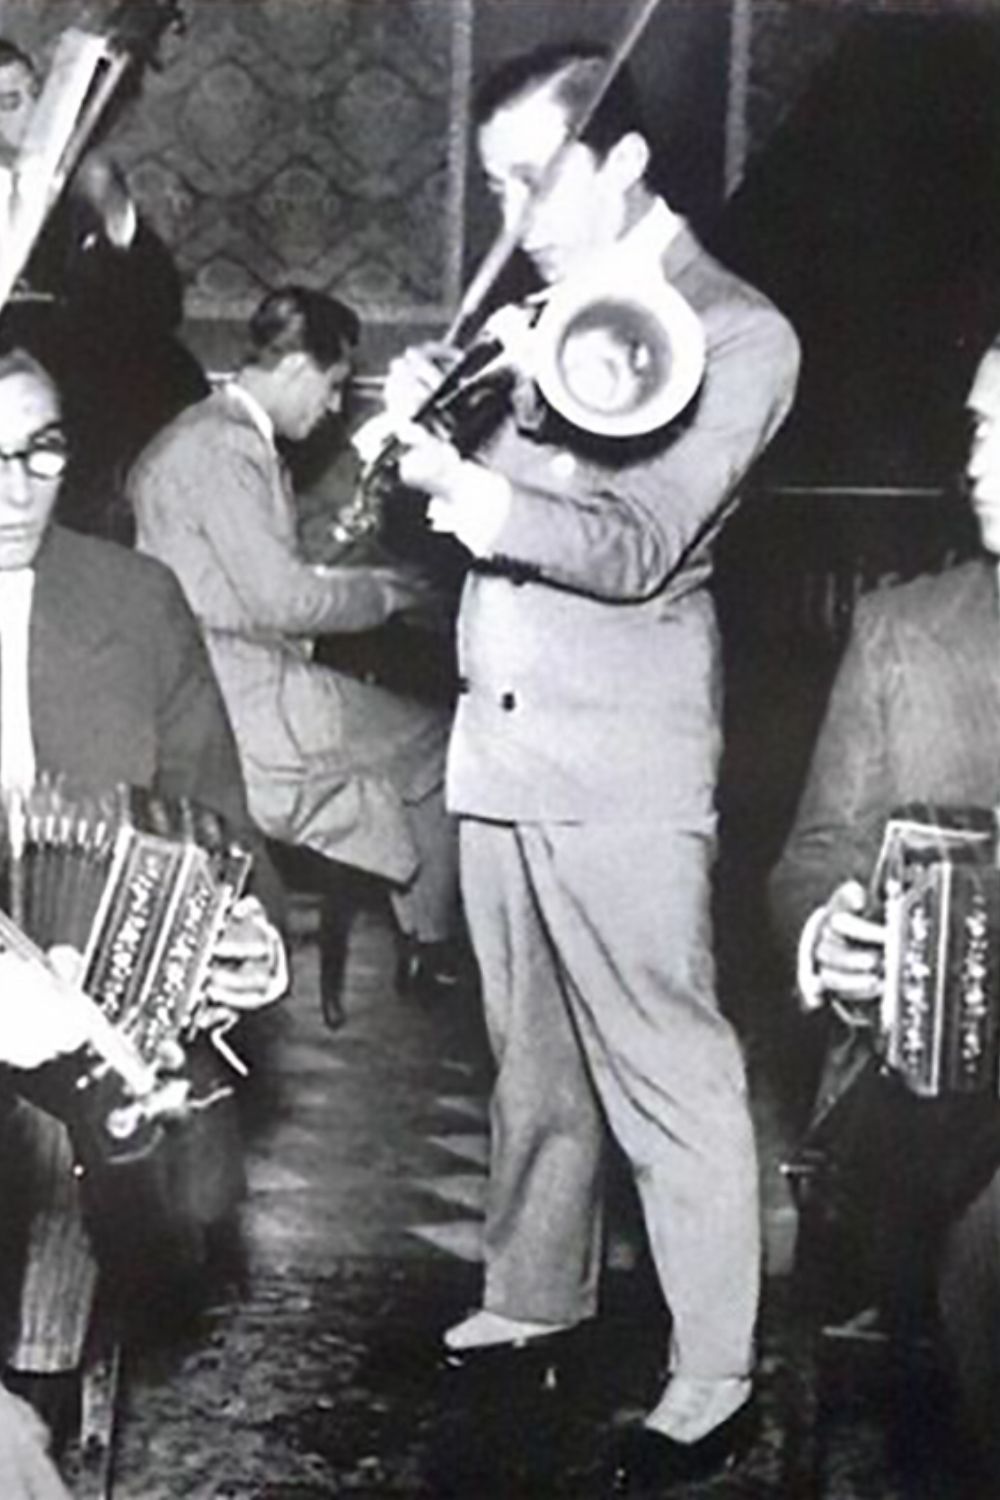 Carlos Gardel, legendary Argentine Tango singer, with musicians, colleagues and friends